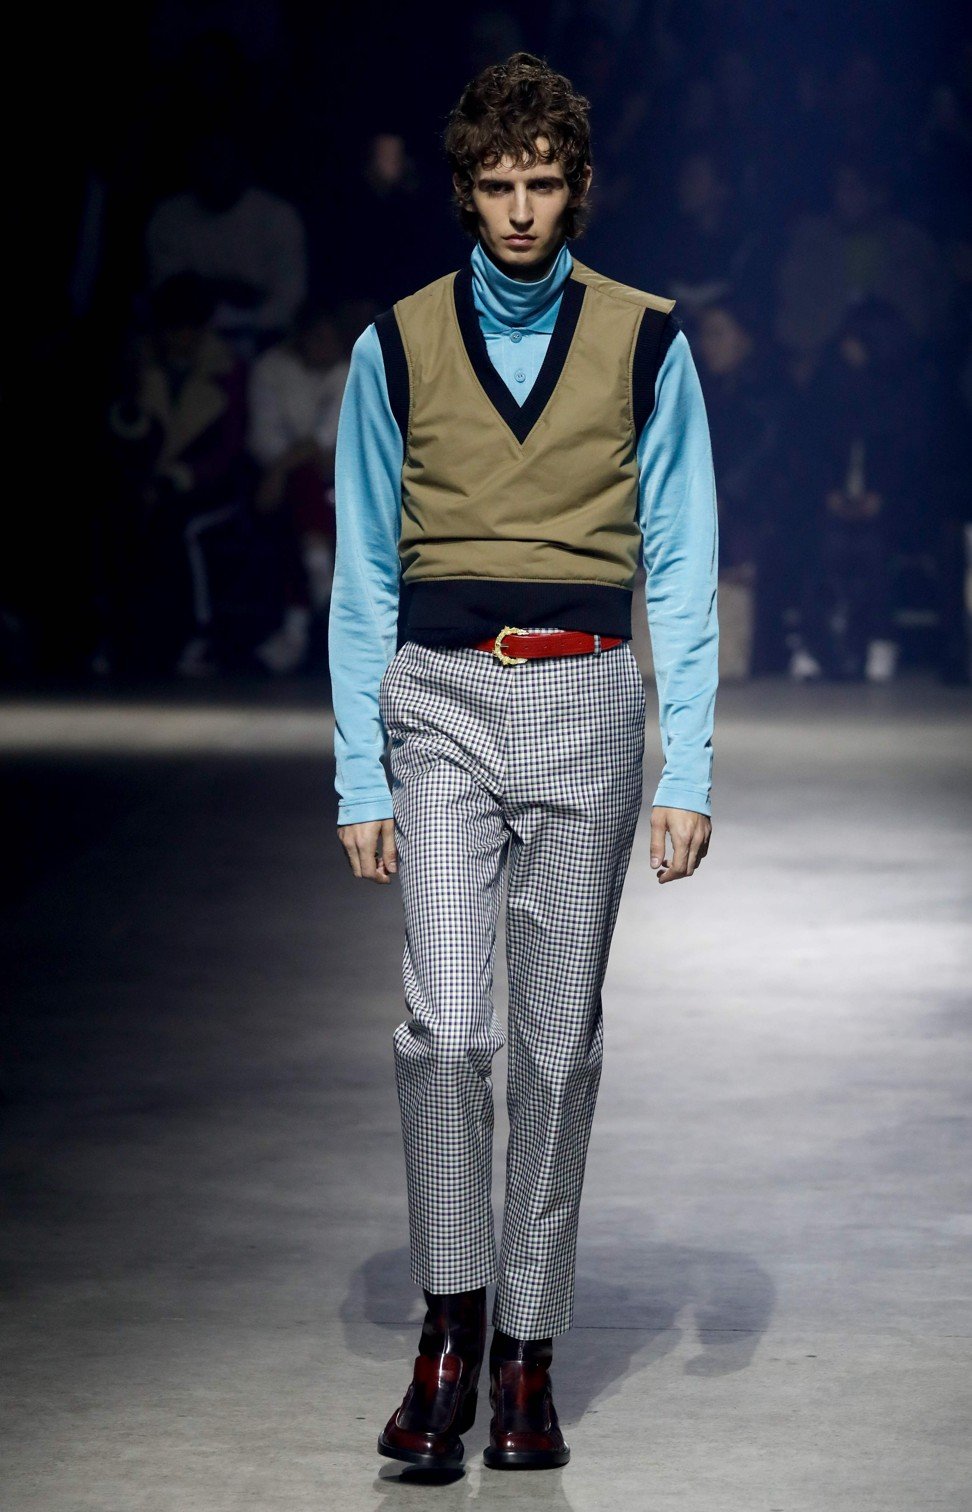 Colours and patterns offer a sharp contrast in Kenzo’s collection. Photo: EPA